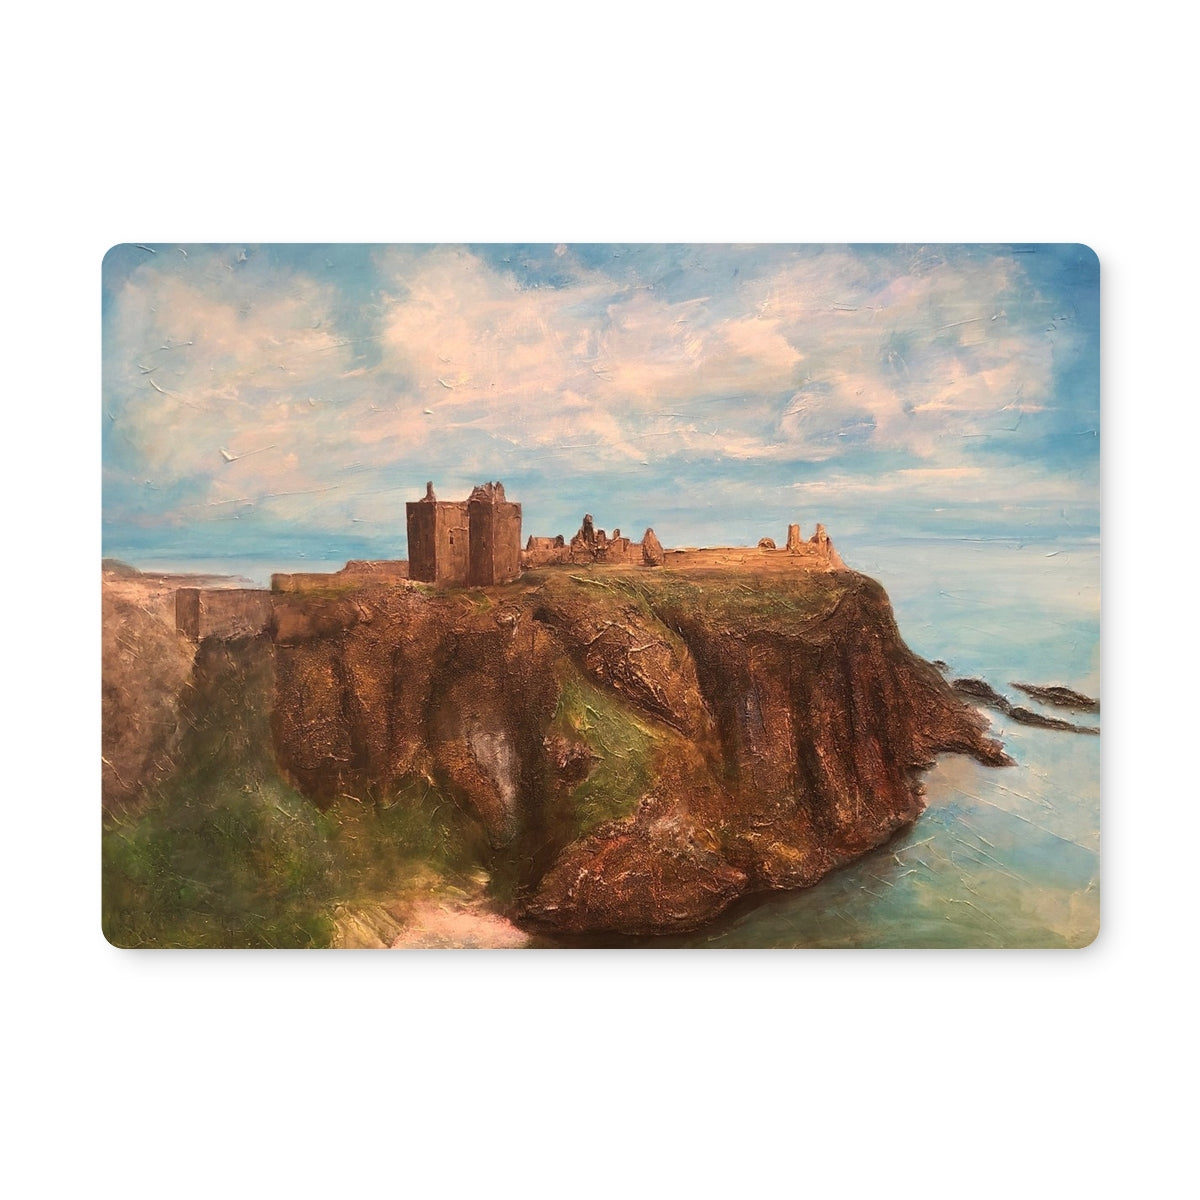 Dunnottar Castle Art Gifts Placemat-Homeware-Prodigi-4 Placemats-Paintings, Prints, Homeware, Art Gifts From Scotland By Scottish Artist Kevin Hunter